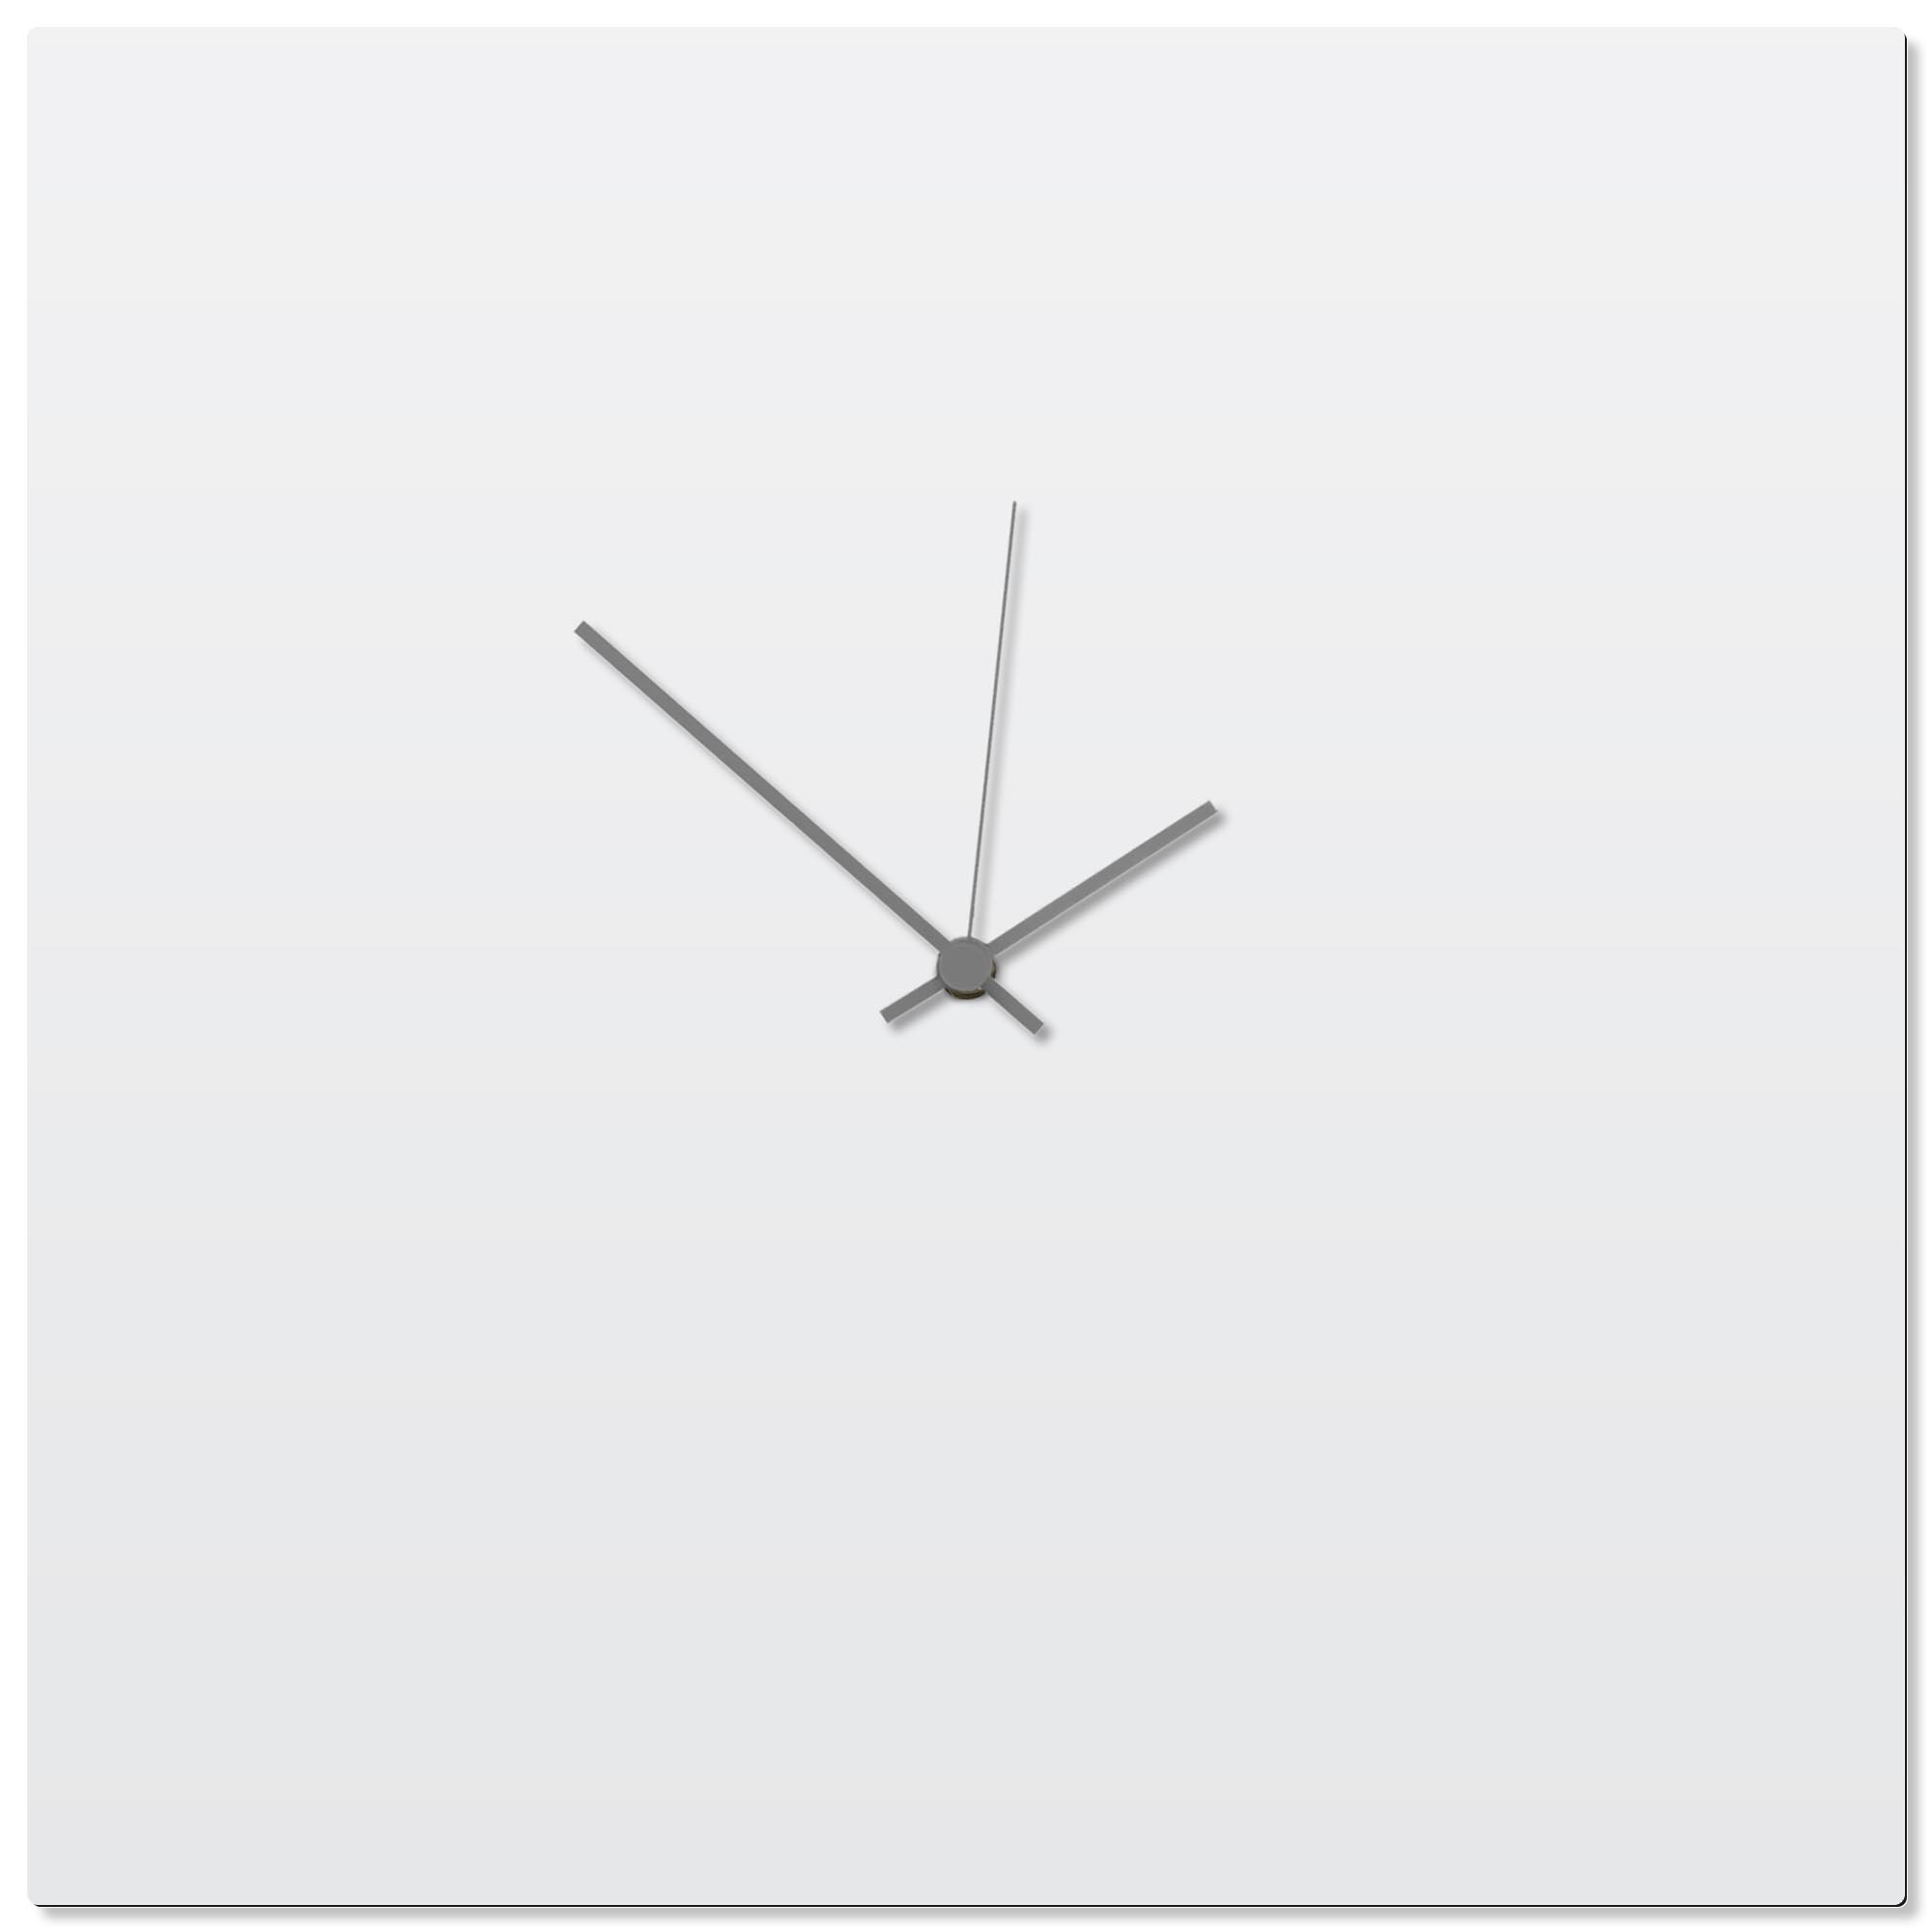 Whiteout Grey Square Clock Large 23x23in. Aluminum Polymetal